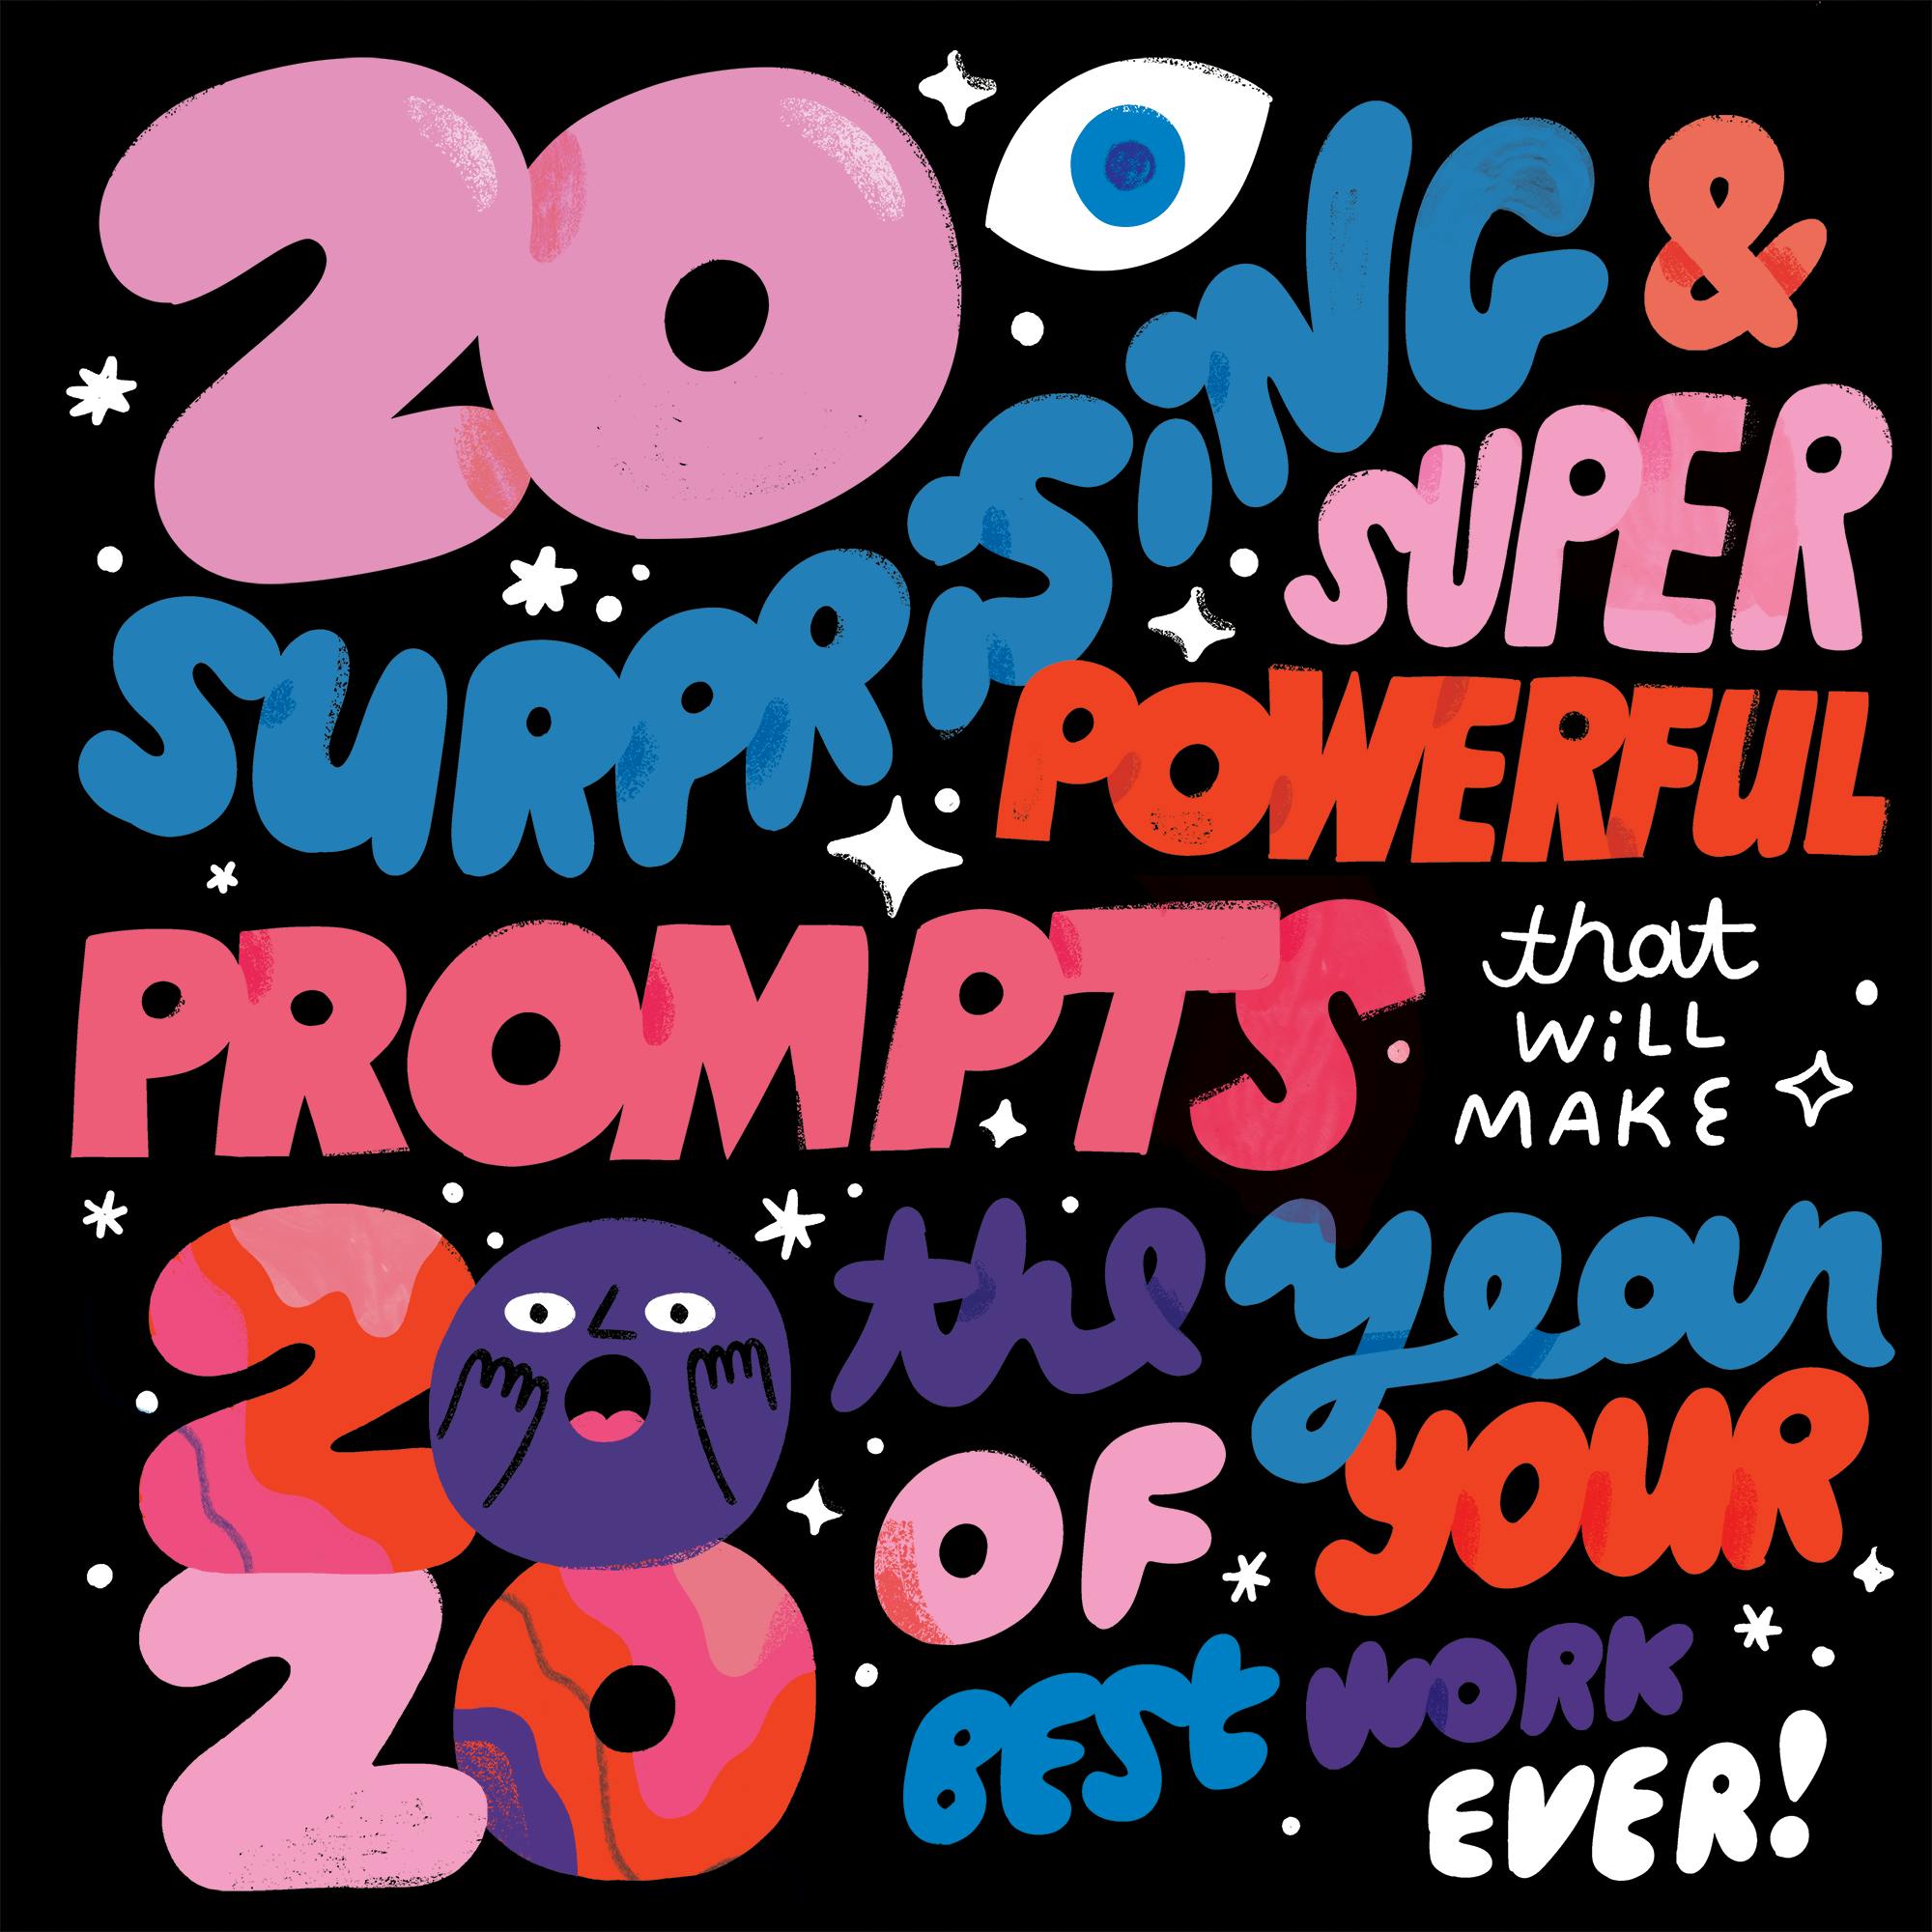 259 - 20 Surprising and Super Powerful Prompts that will Make 2020 The Year You Do Your Best Work Ever!